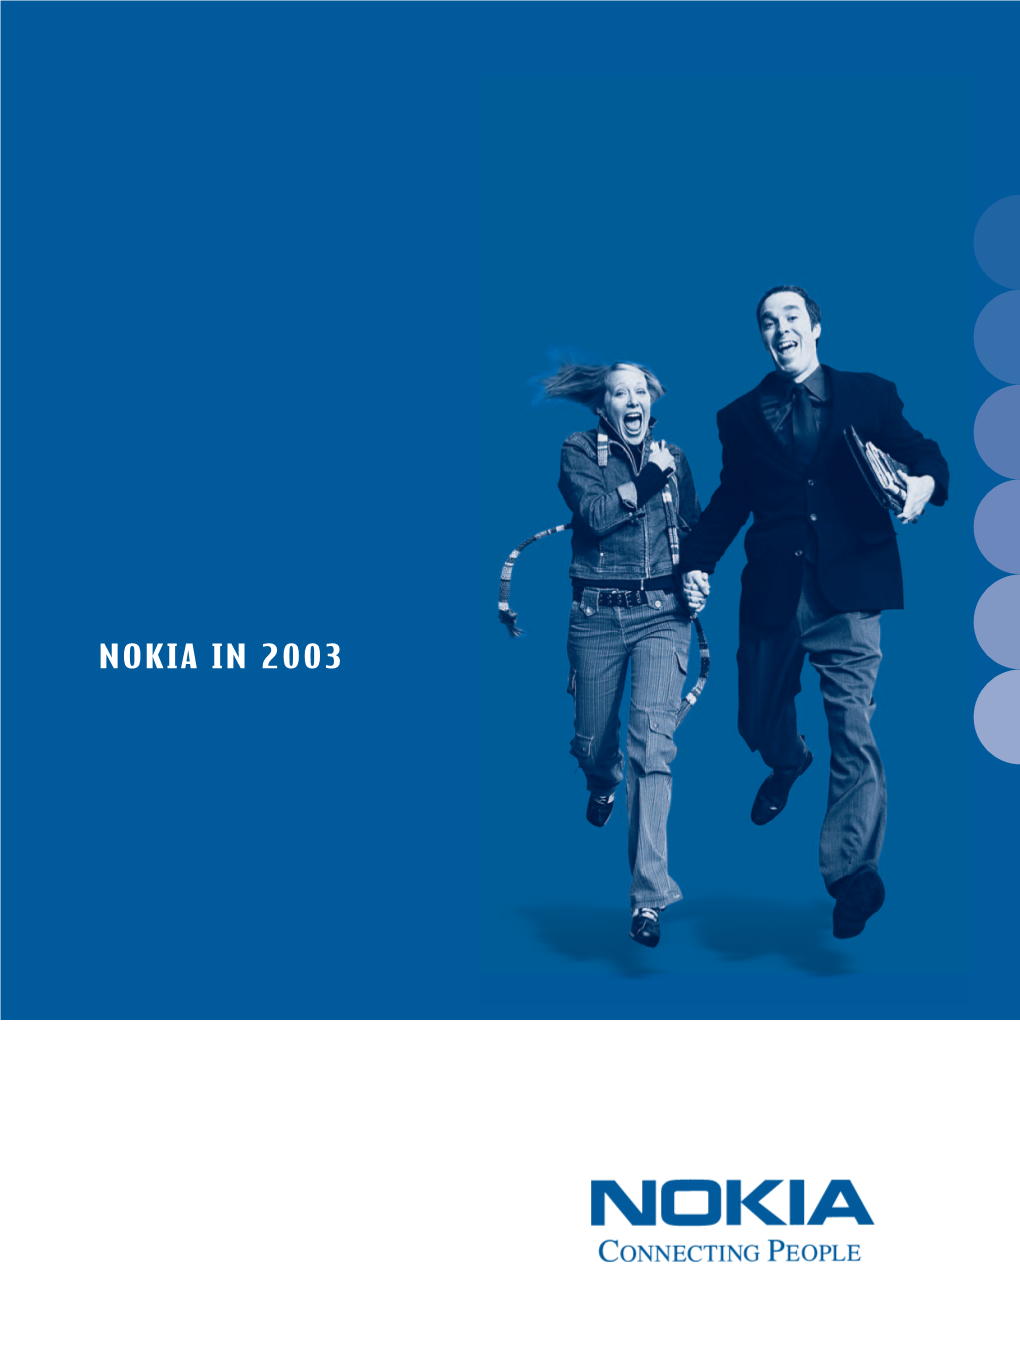 Nokia in 2003 Annual Accounts